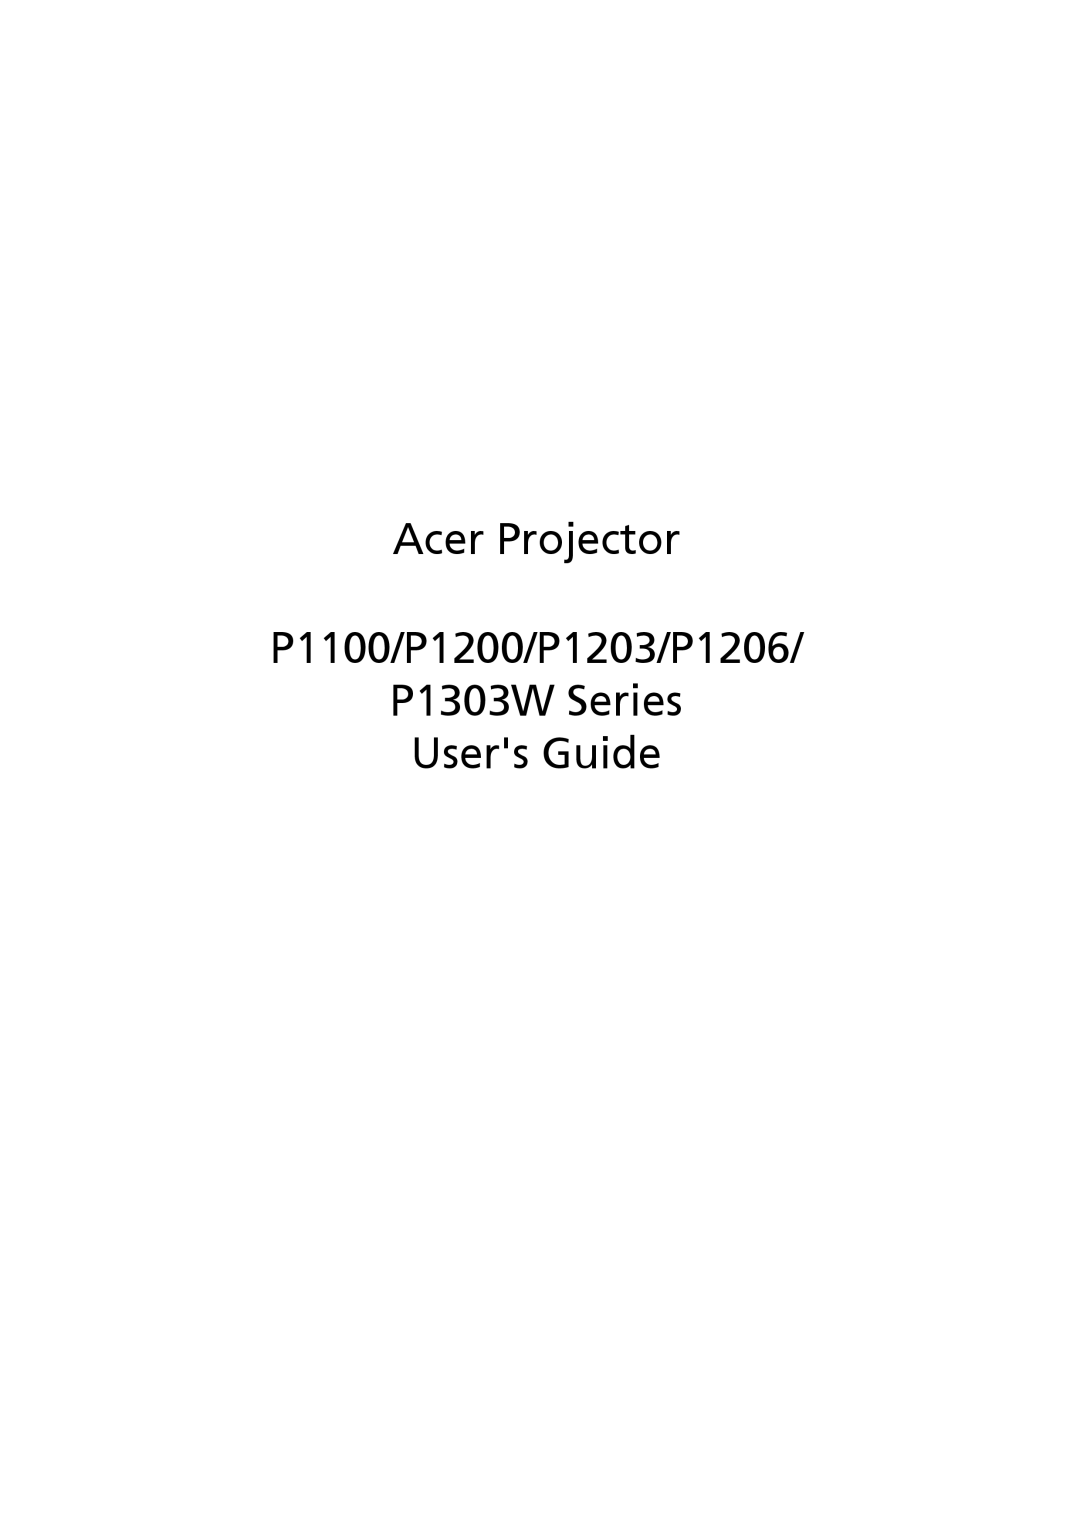 Acer manual Acer Projector P1100/P1200/P1203/P1206 P1303W Series Users Guide 